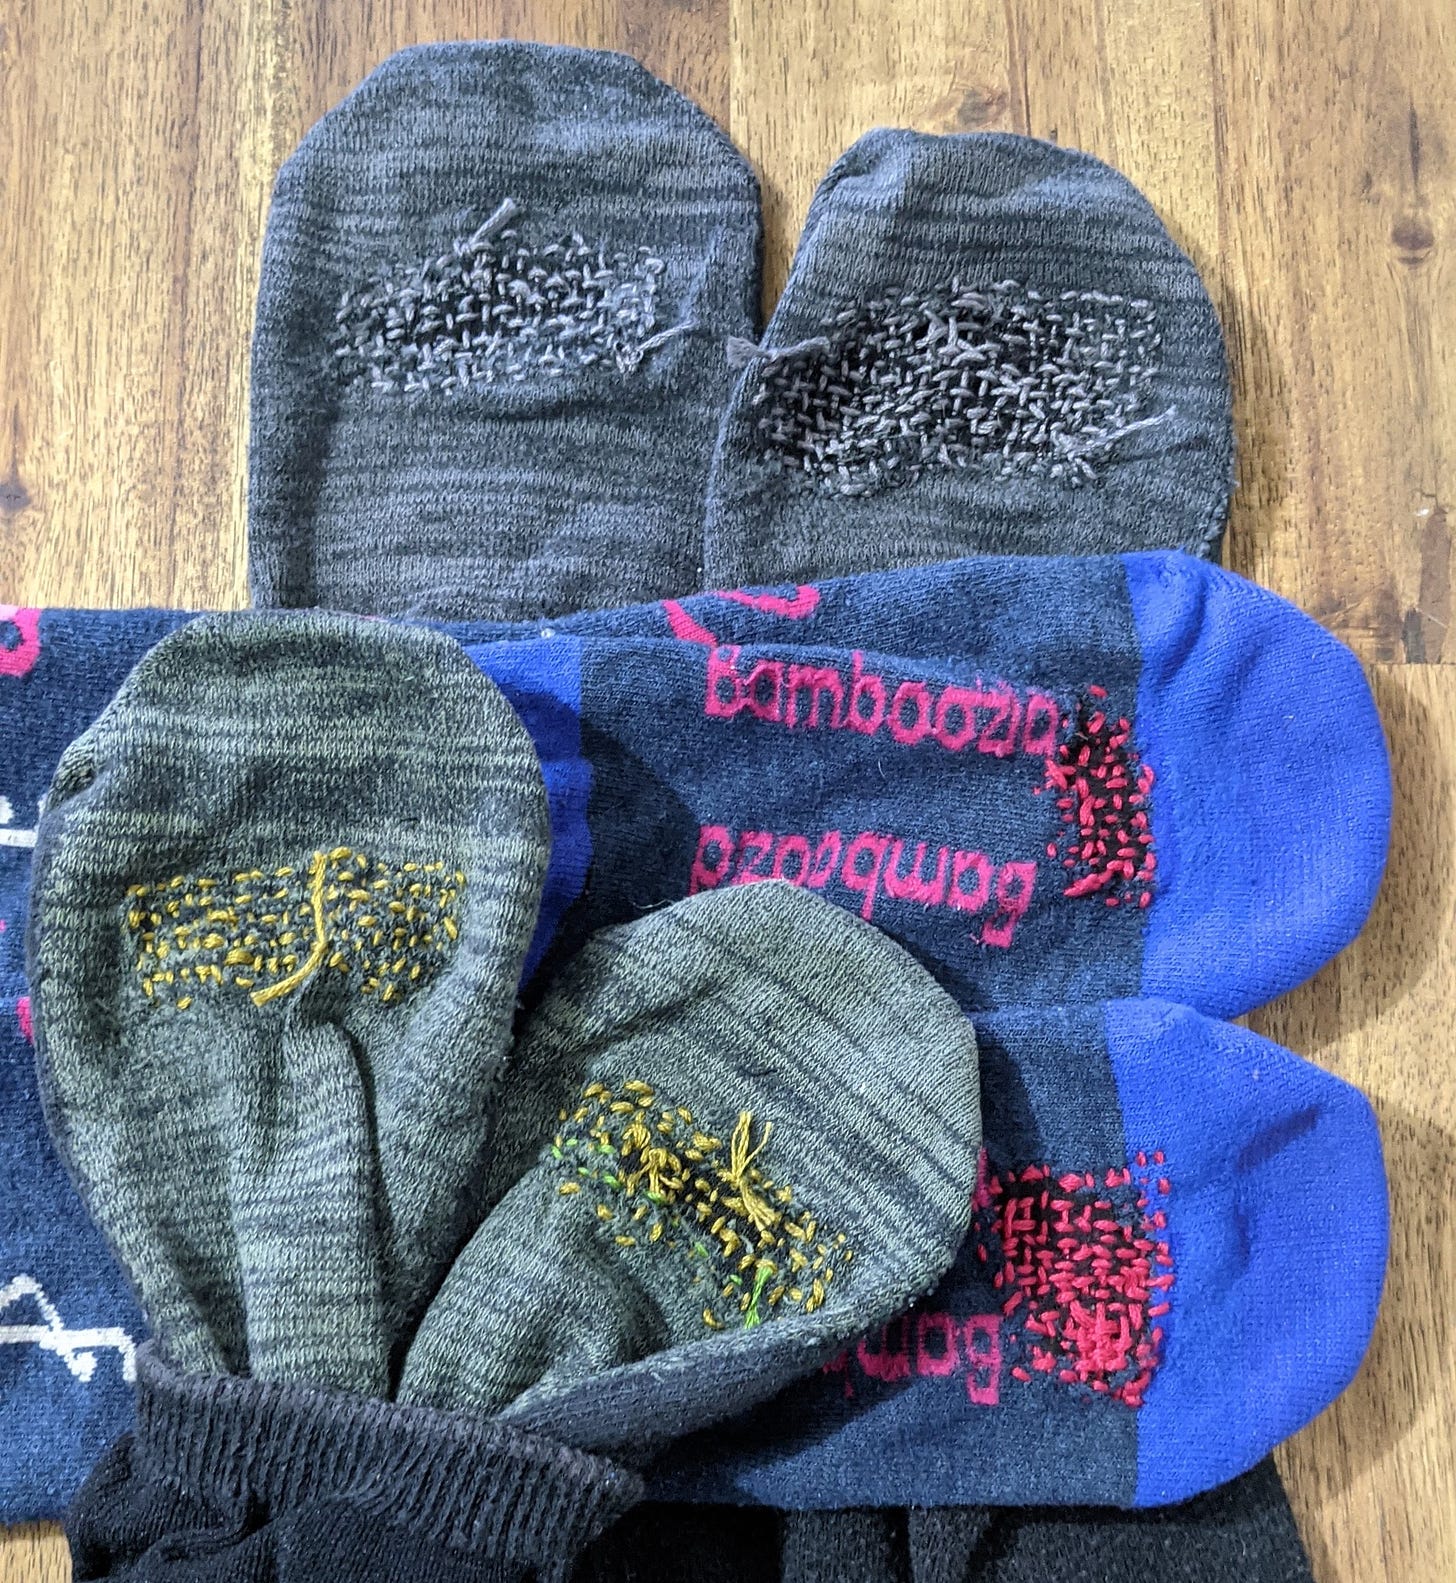 A pile of colourful socks with visible mending on the bottom